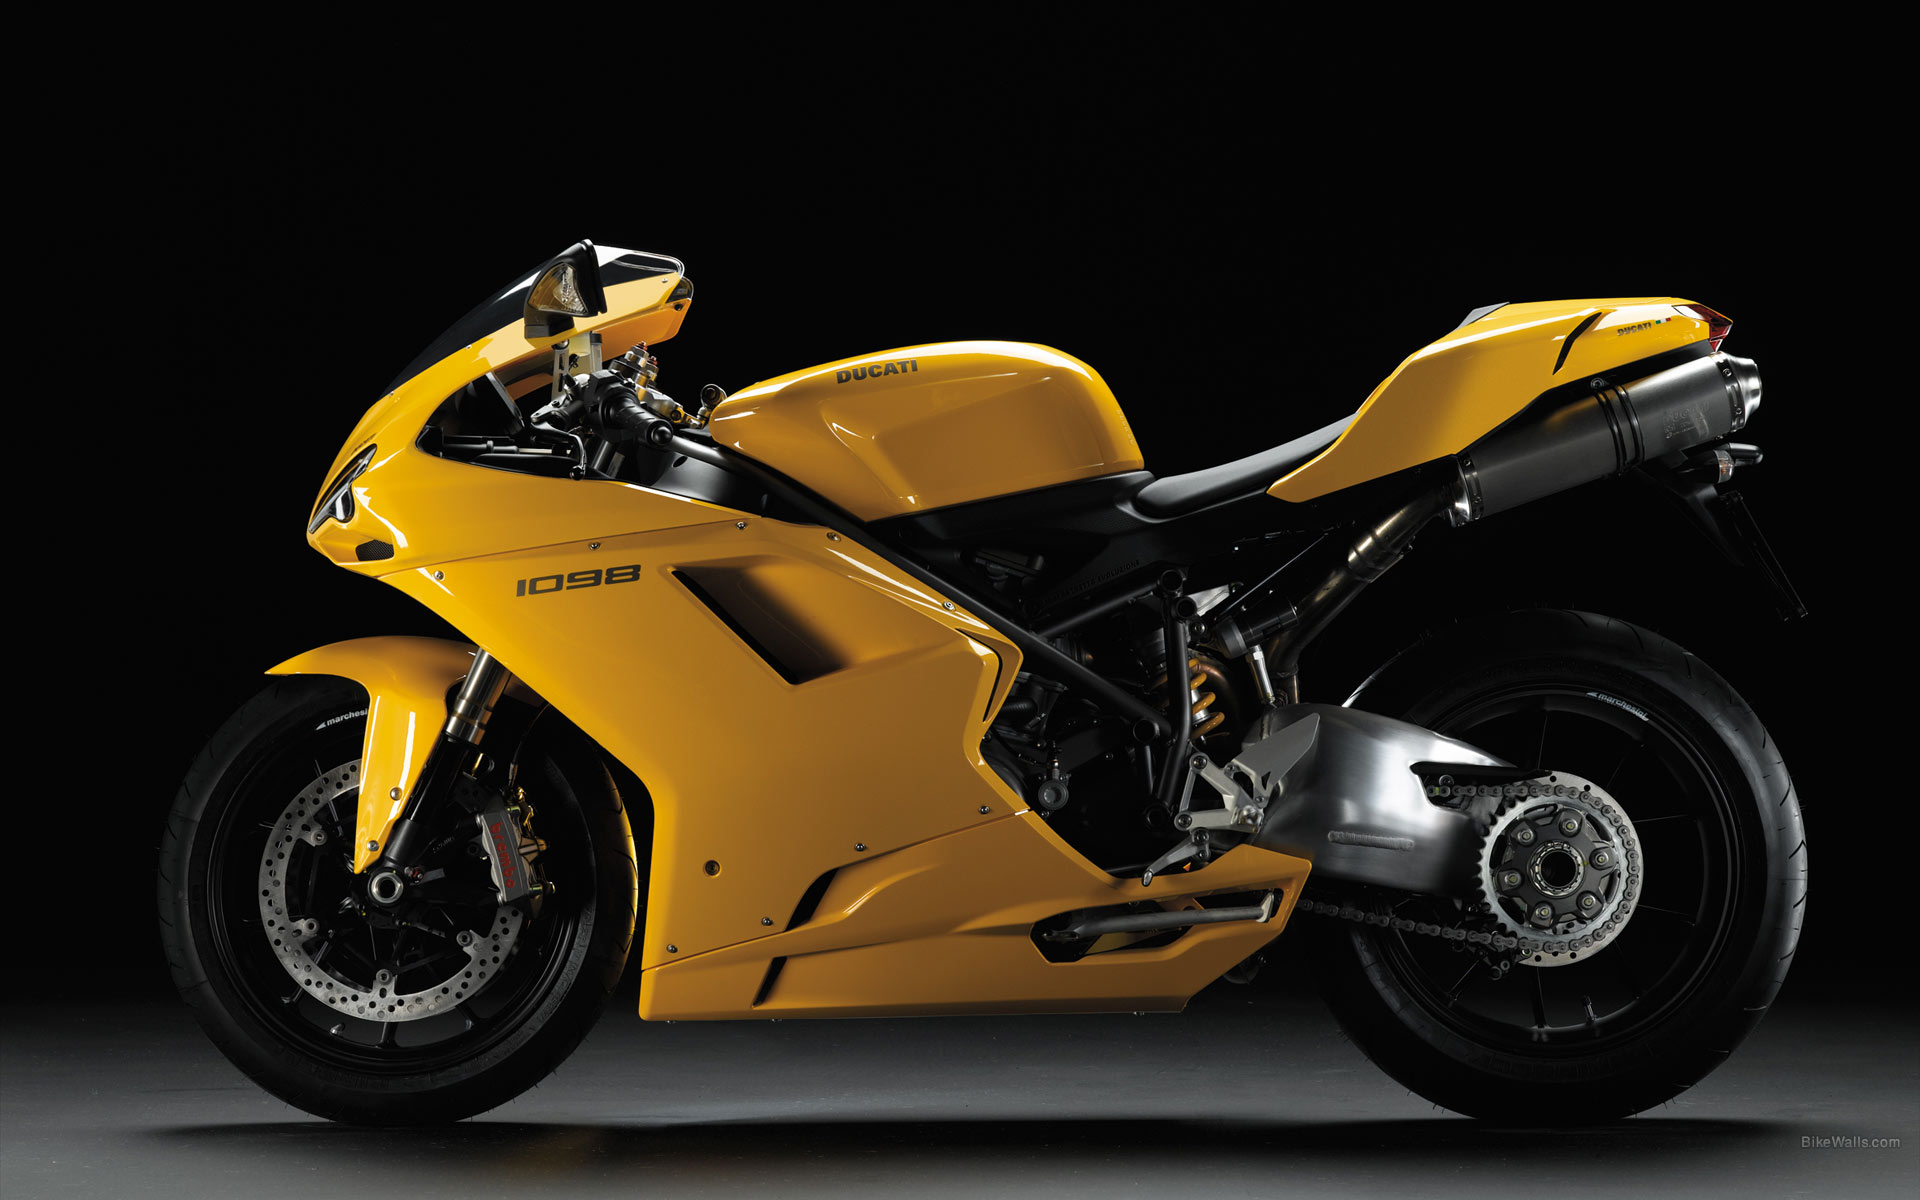 Free download Ducati 1098 17596 Hd Wallpapers in Bikes Imagescicom